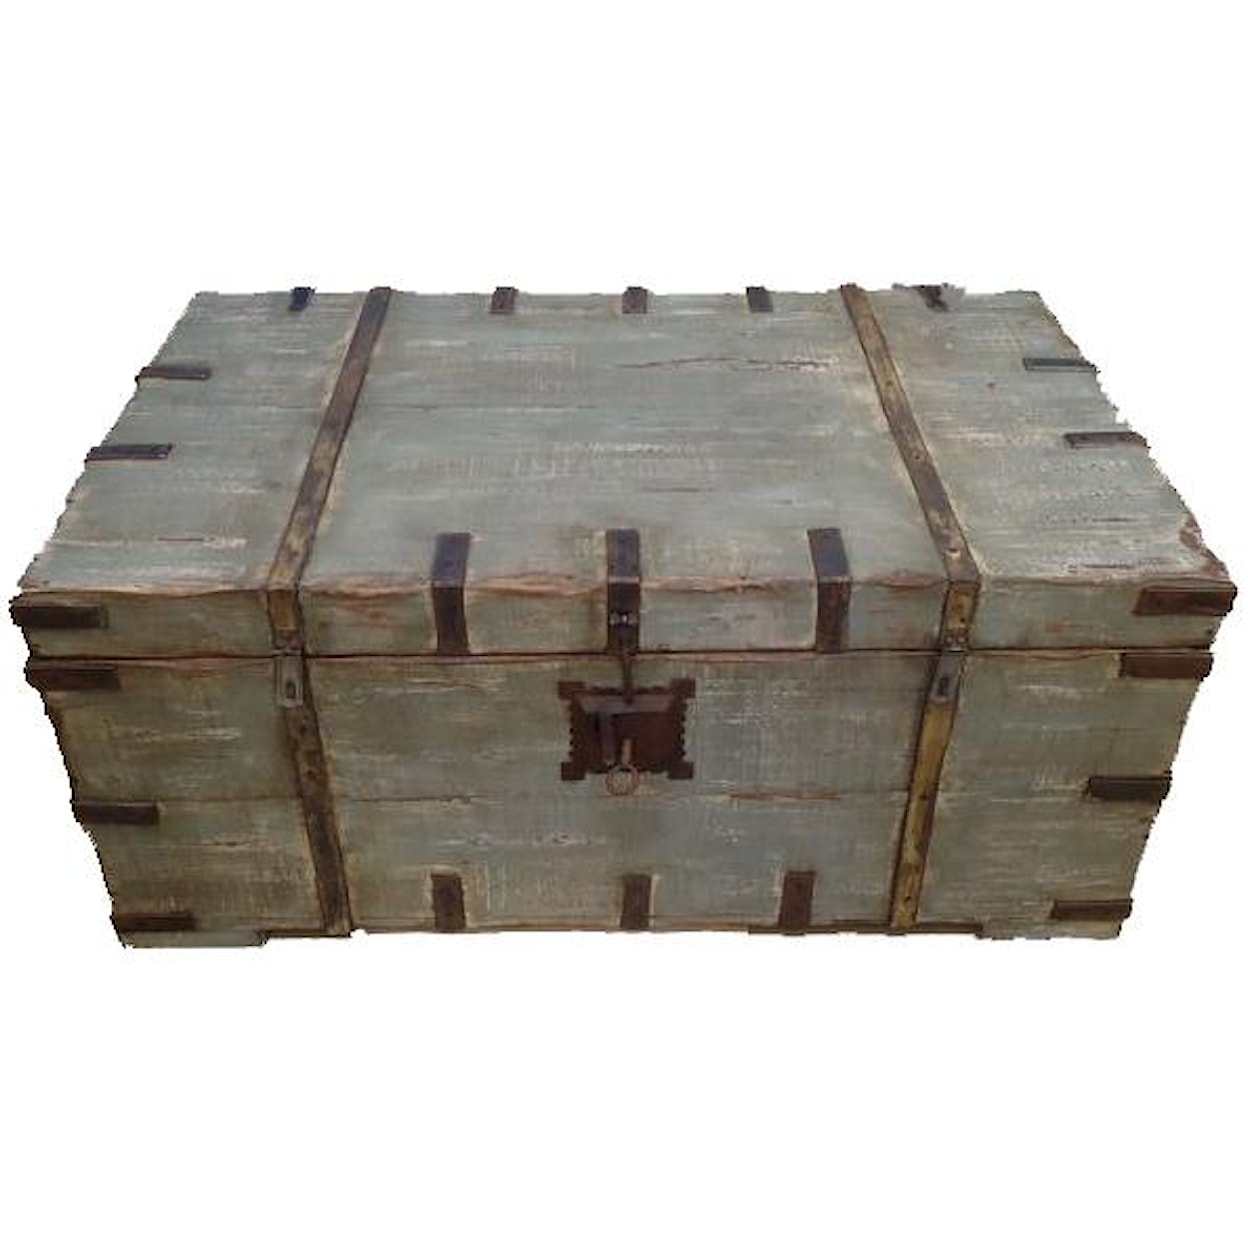 Furniture Source International Occasional Tables Antique Trunk Coffee Table